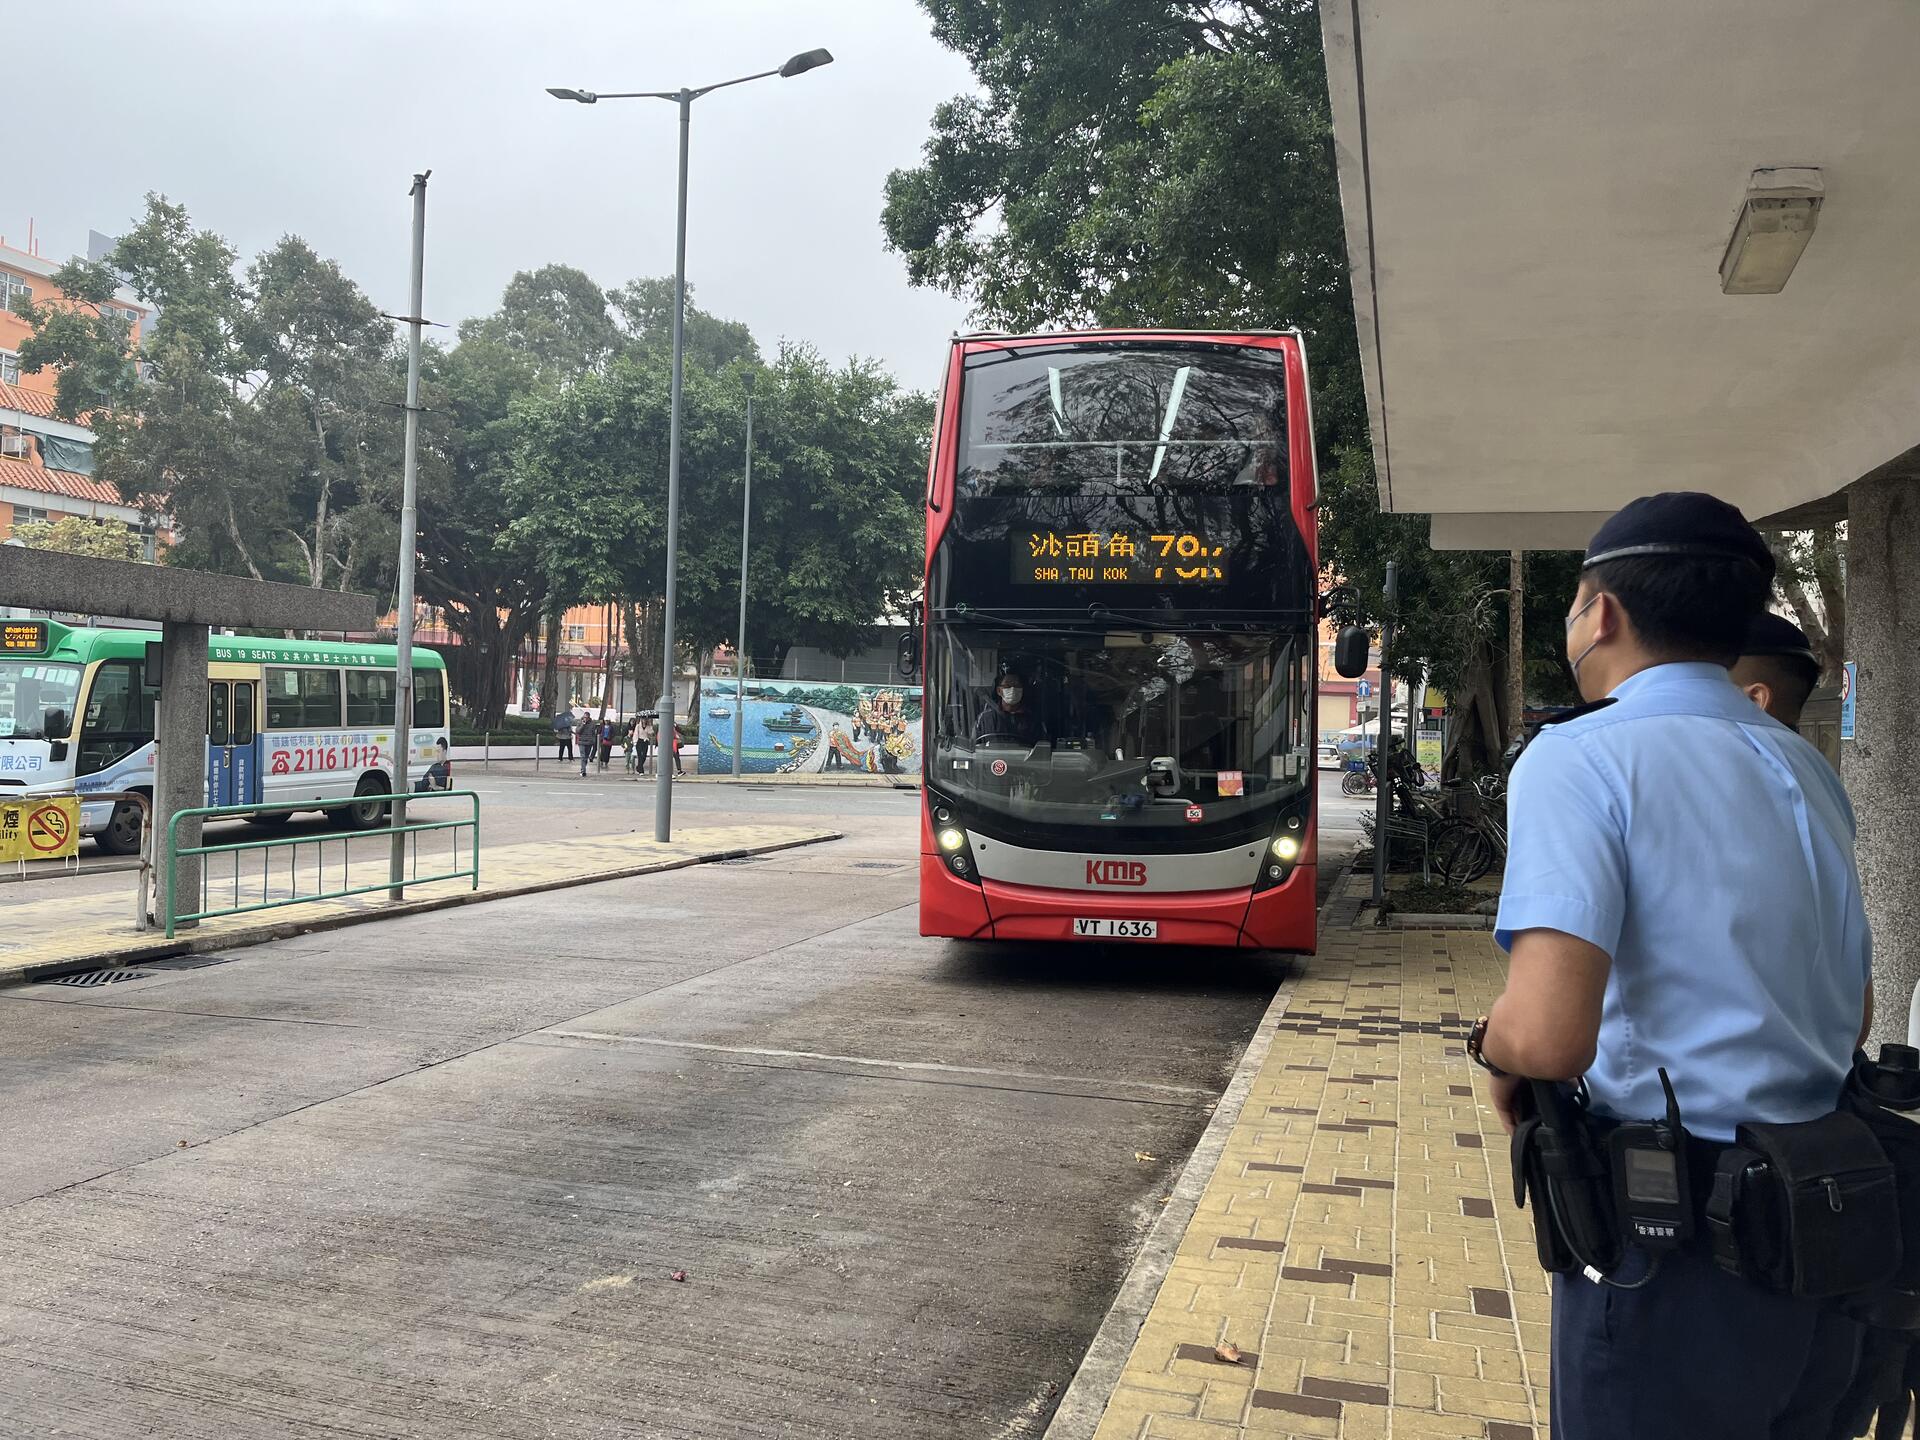 KMB bus 78K at Sha Tau Kok Bus Stop, for buses, the police will check passengers&rsquo; closed area permits when they get off